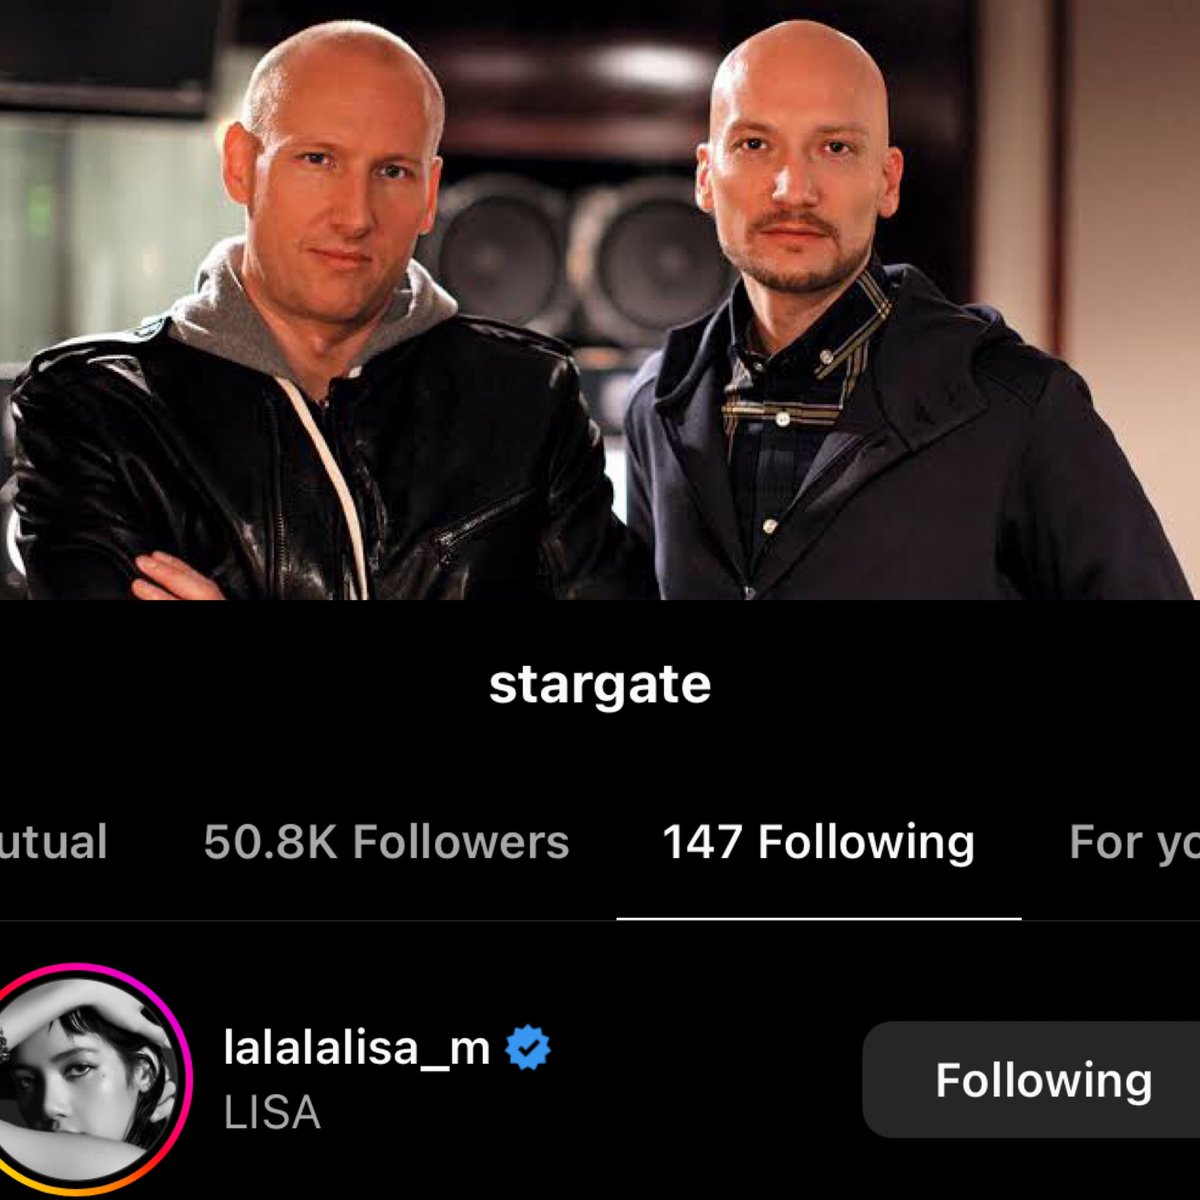 STARGATE (Mikkel Eriksen & Tor Hermansen, songwriter & producer) just followed #LISA on IG. (Since 2006, Norwegian songwriting and production duo Stargate have been storming charts around the world. In the US alone, they have enjoyed a staggering 21 top 10 hits during the last…